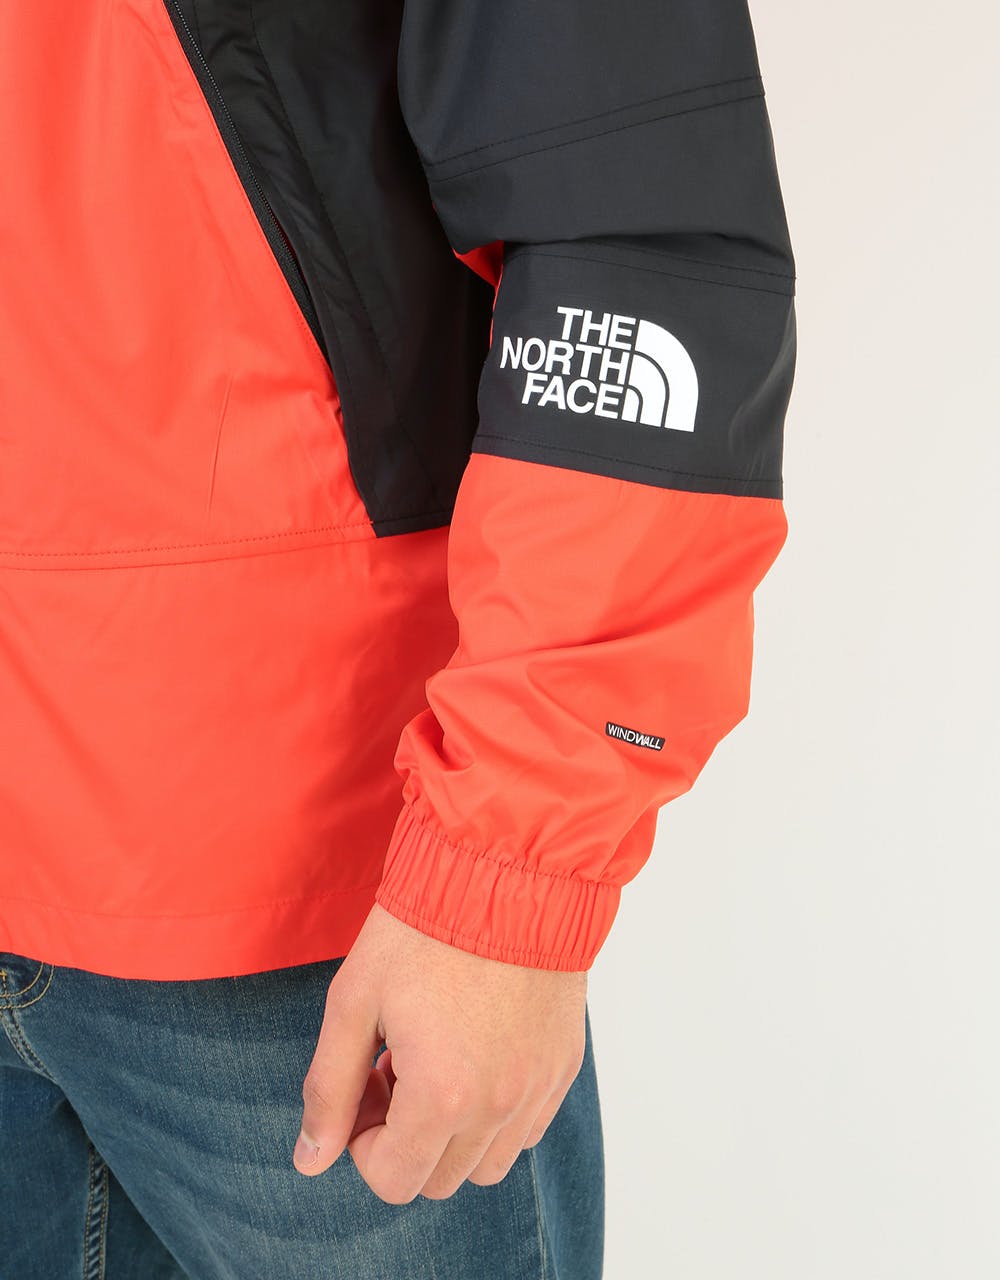 The North Face Mountain Light Windshell Jacket - Fiery Red/TNF Black